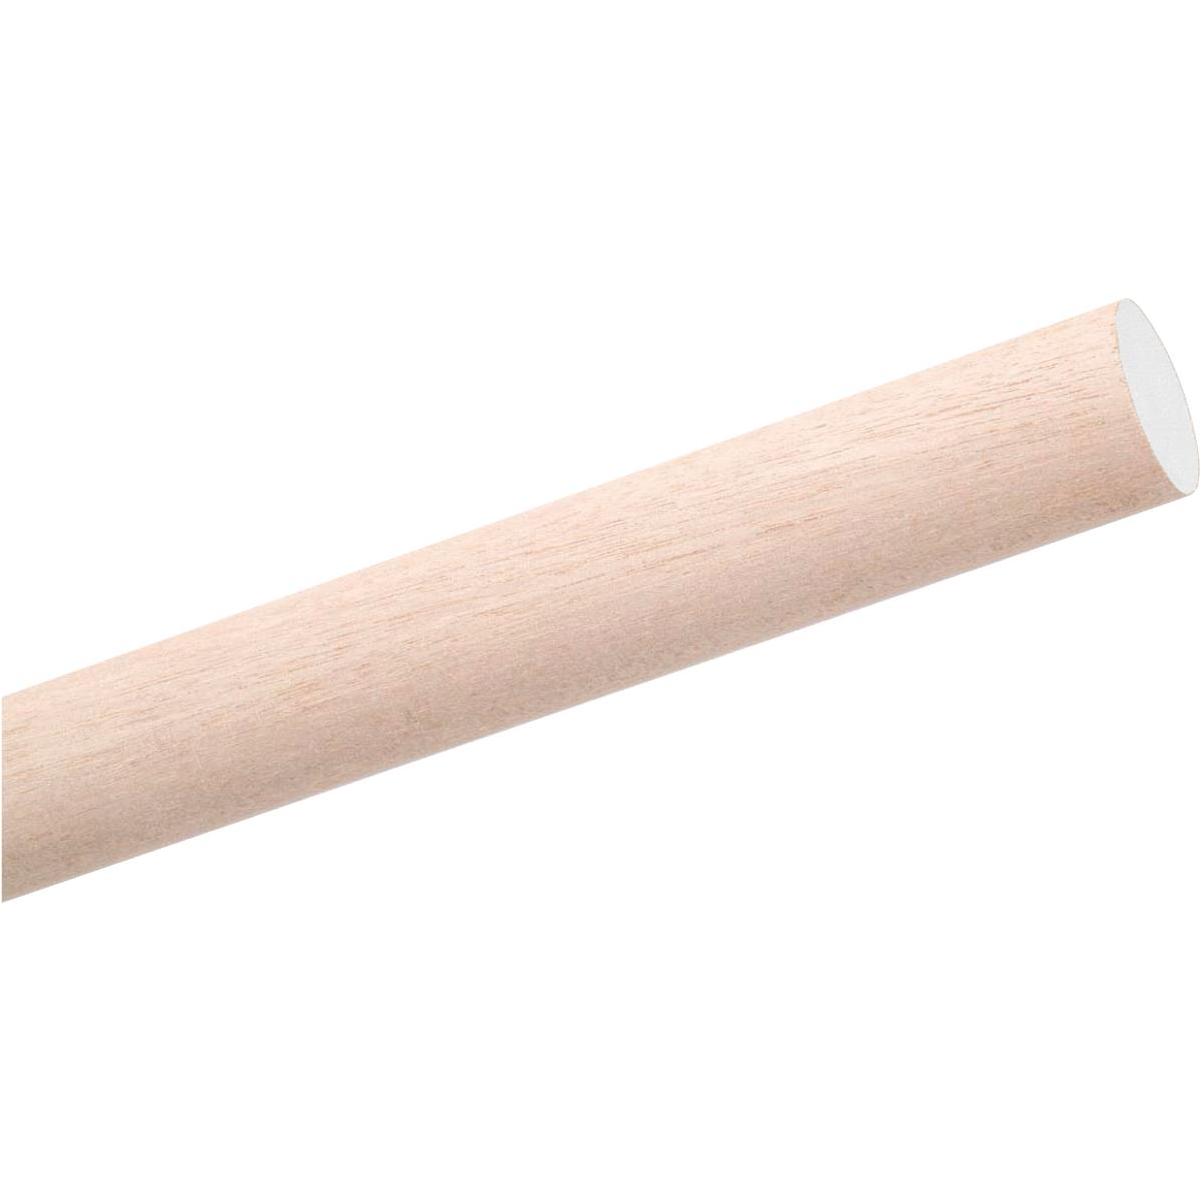 1/2'' x 36'' Wooden Hickory Dowel